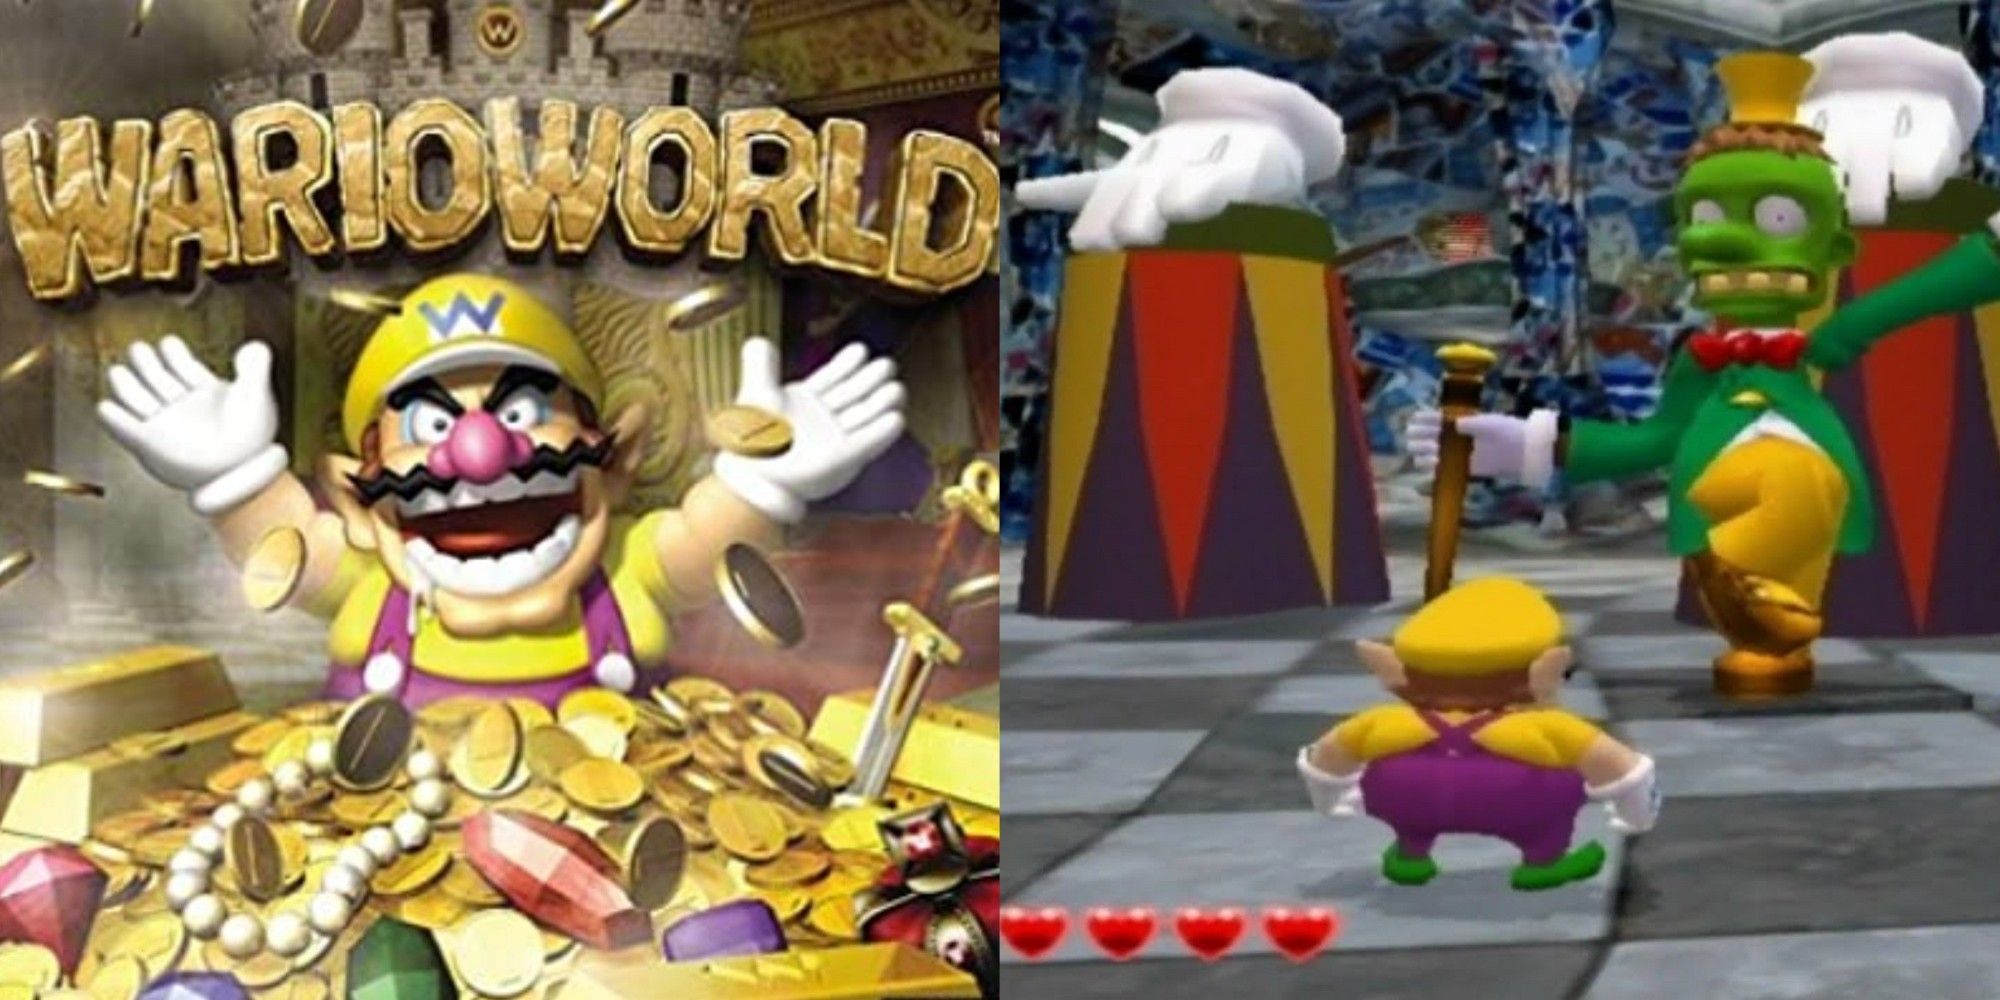 wario world kmart power up edition most expensive gamecube games